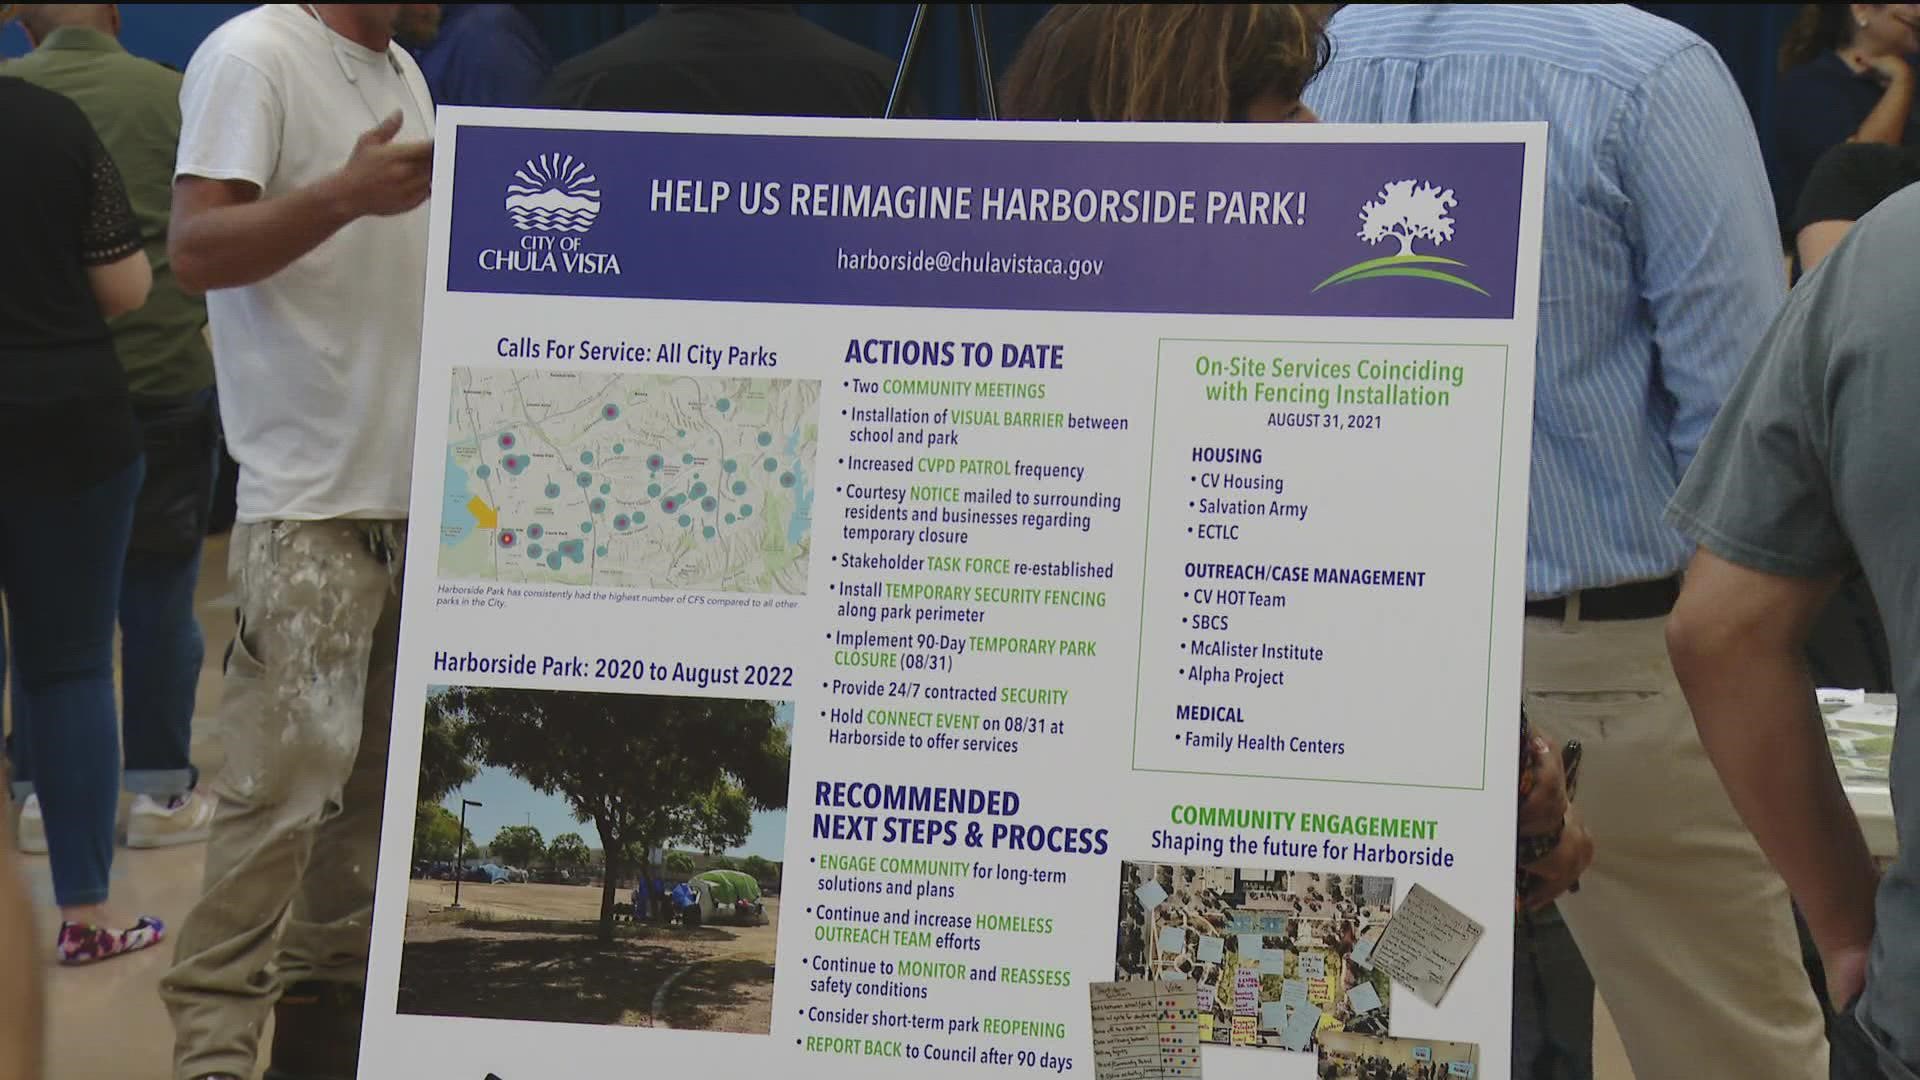 Chula Vista scheduled a community meeting to gather the public’s input and help “reimagine” the site.